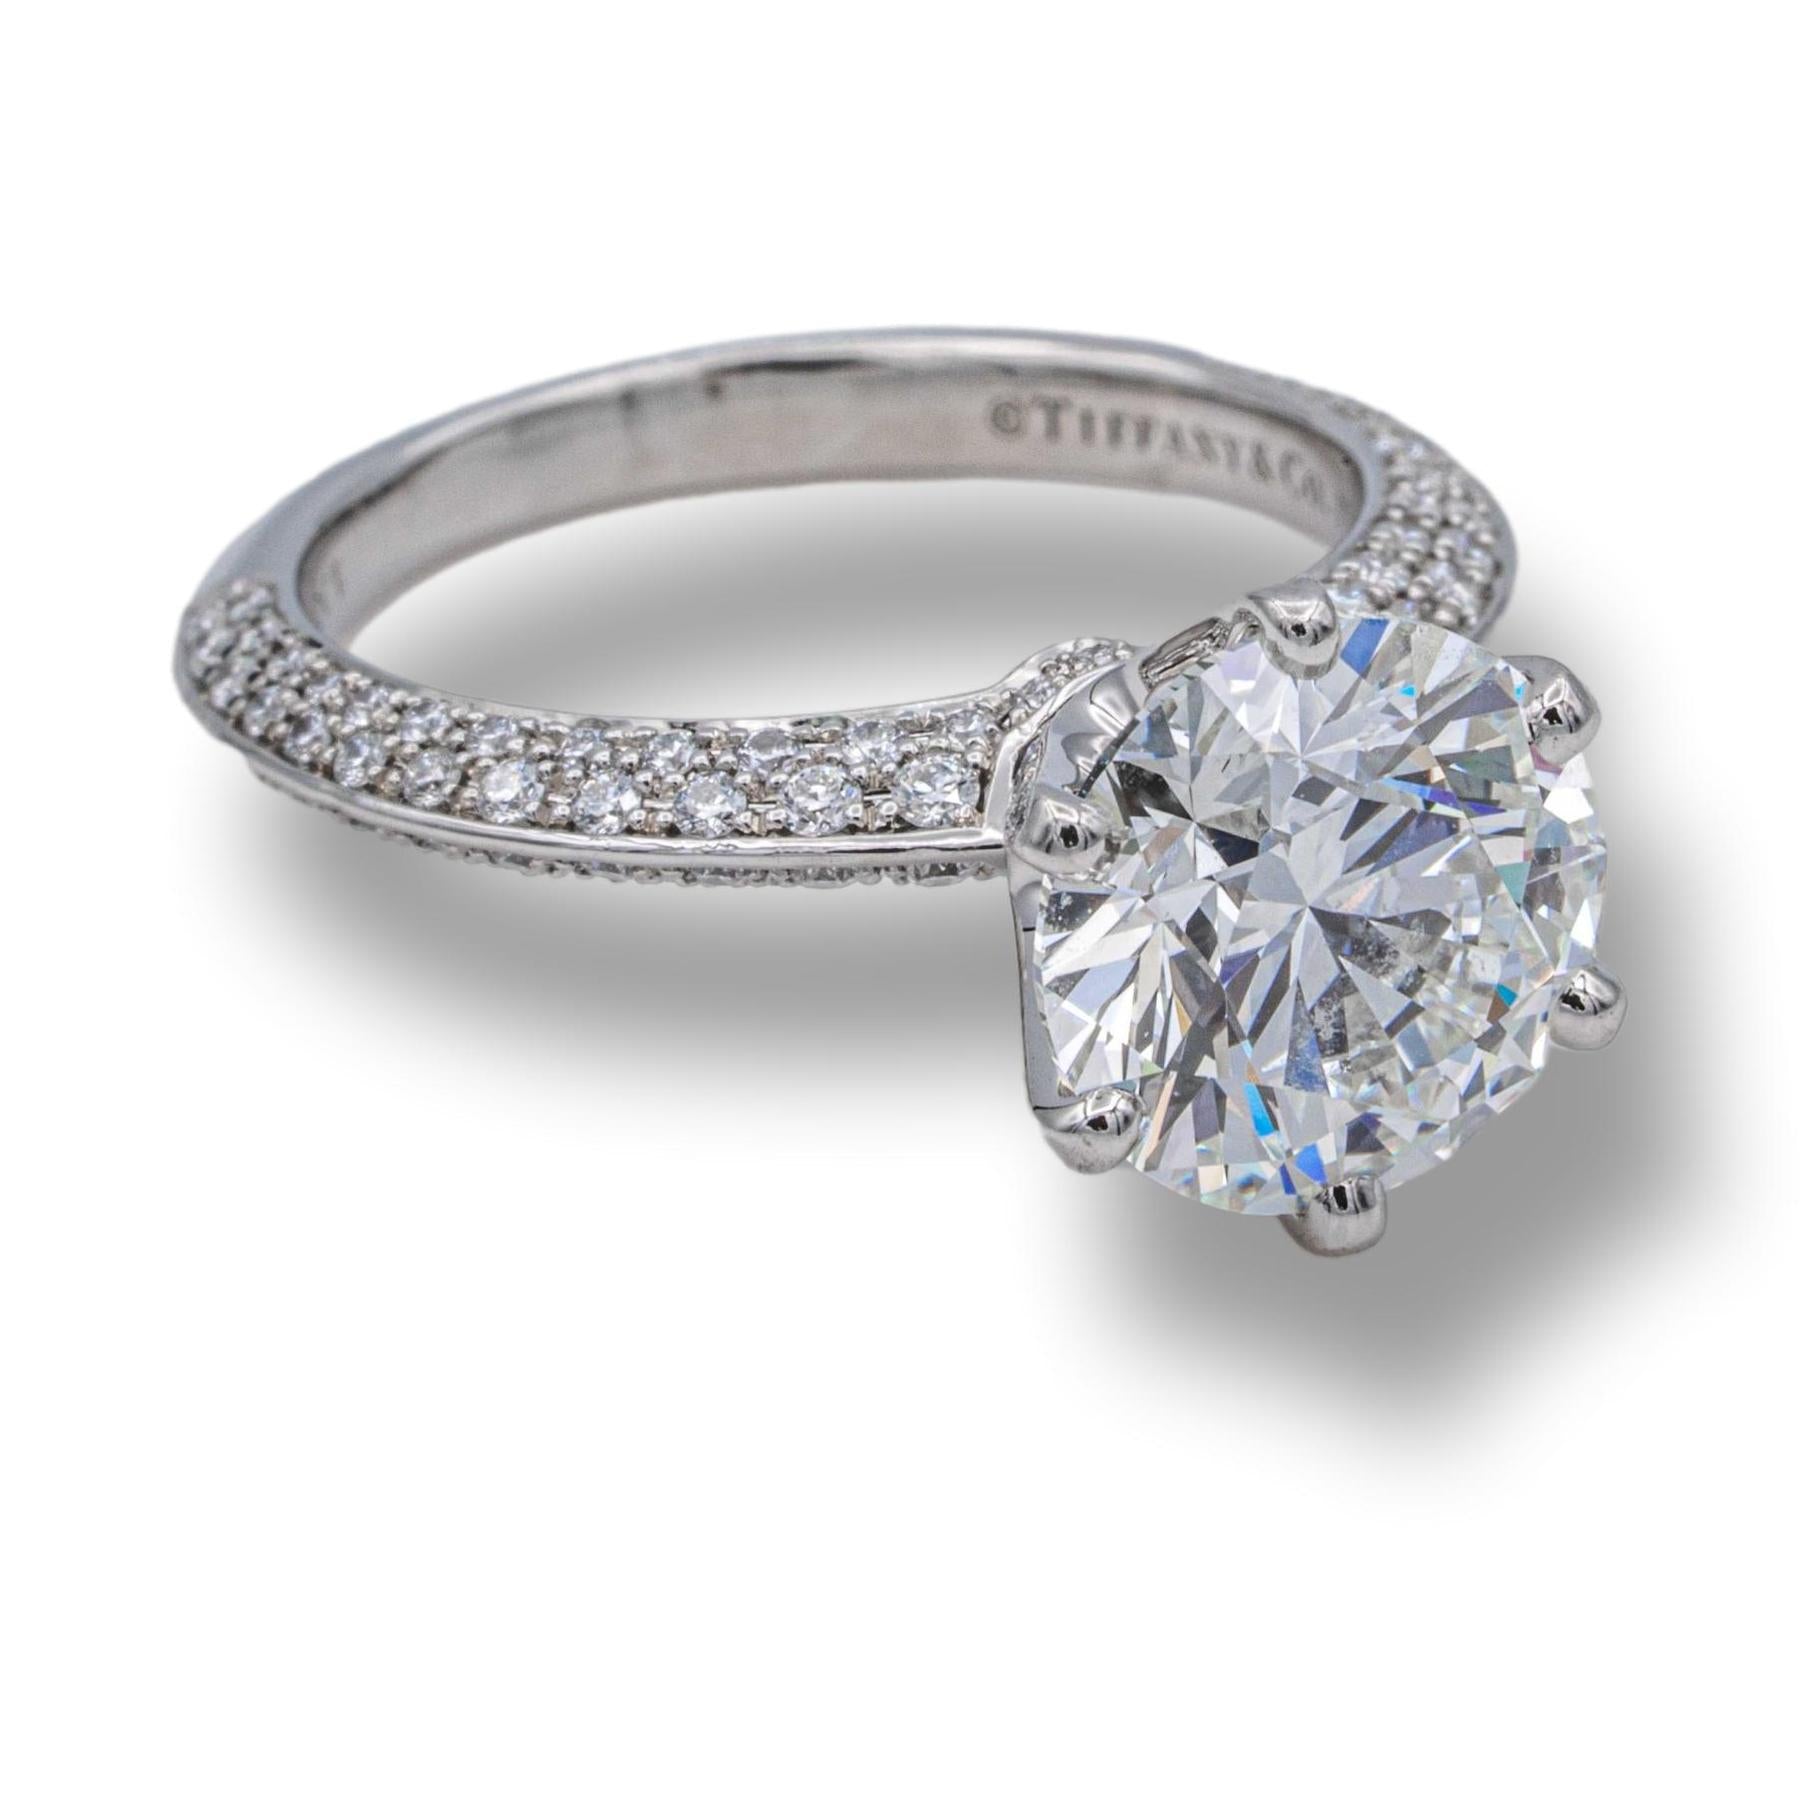 Tiffany & Co. Engagement Rings | Pre-Owned / Used Classic Rings Price | Tiffany'S  Diamond And Gold Rings For Women | Page 3 | The Diamond Oak